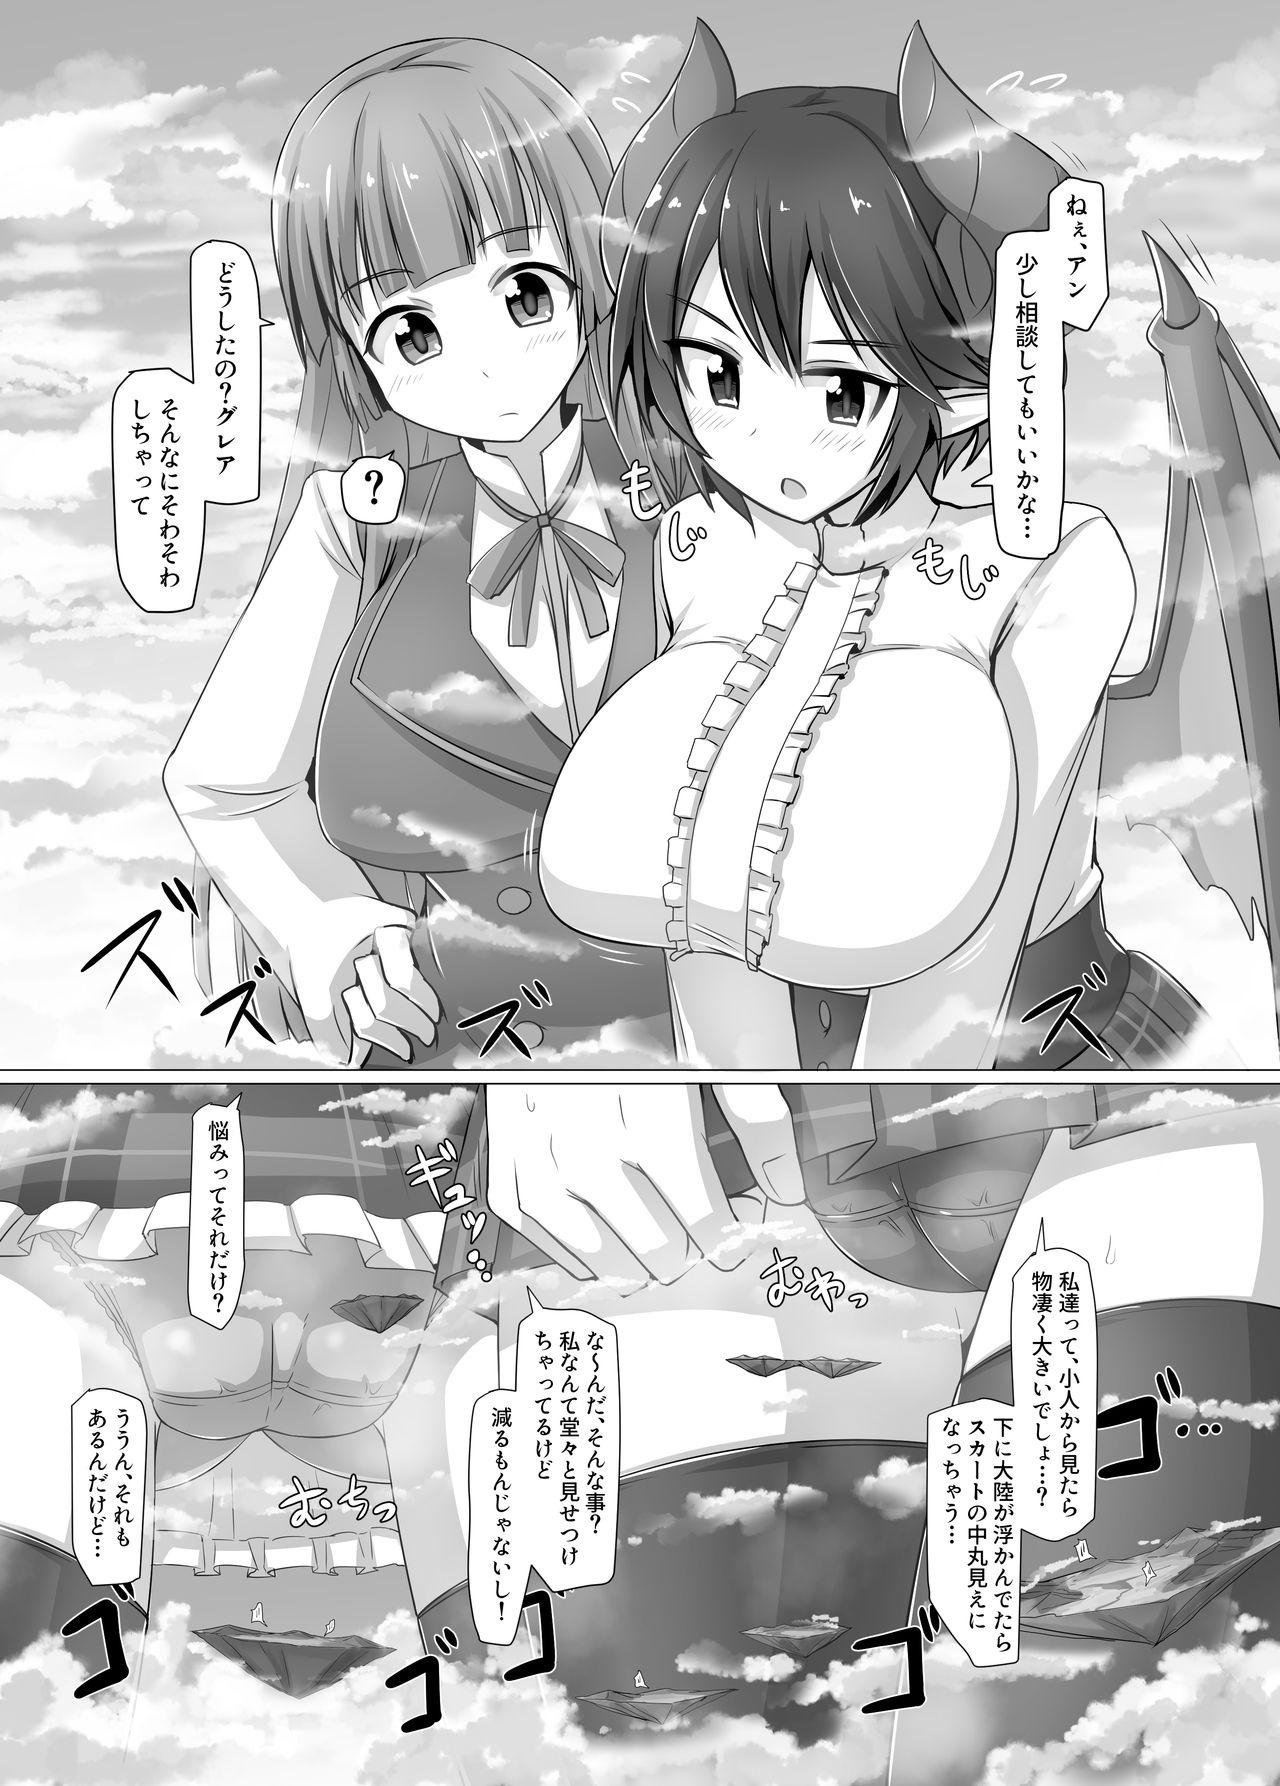 Gay Hunks Gigantic Gas Situation - Manaria friends Beauty - Page 2